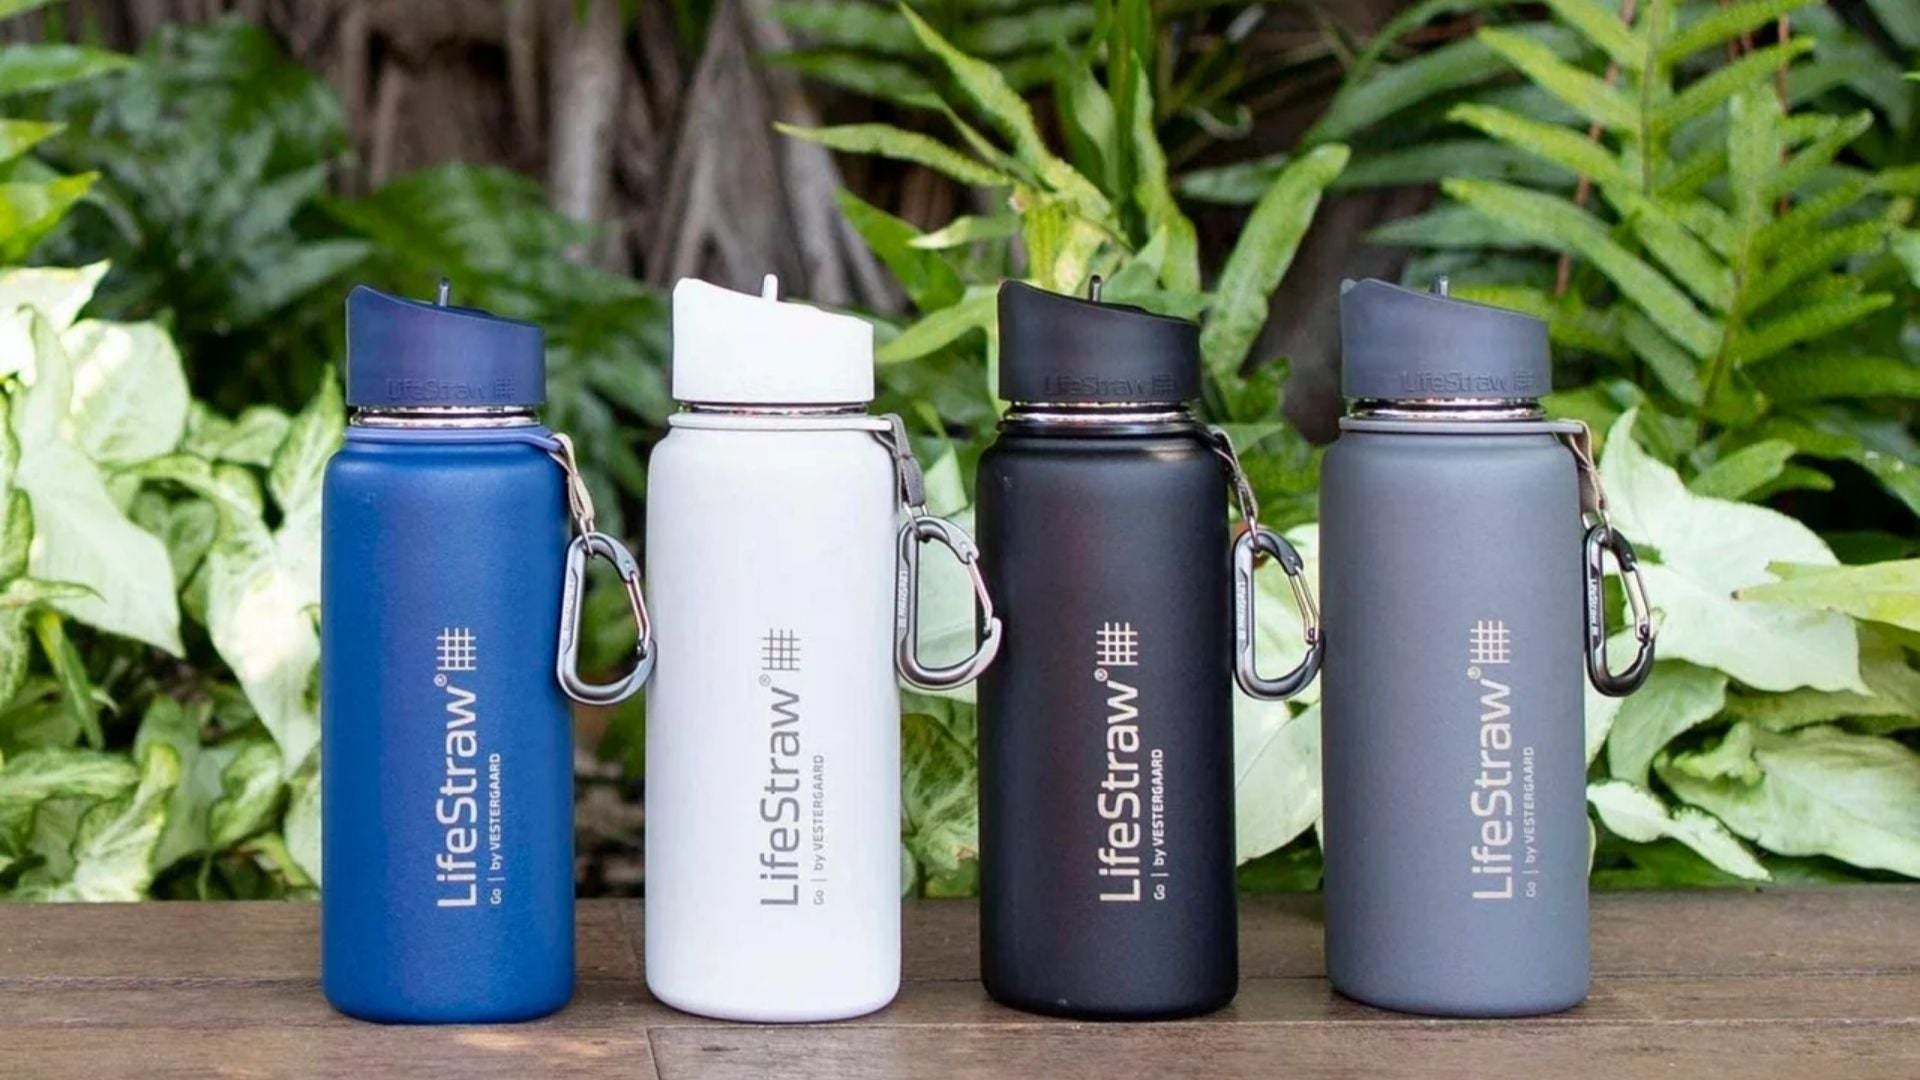 The Best Water Bottle Material: Are Metal Bottles Safe To Drink